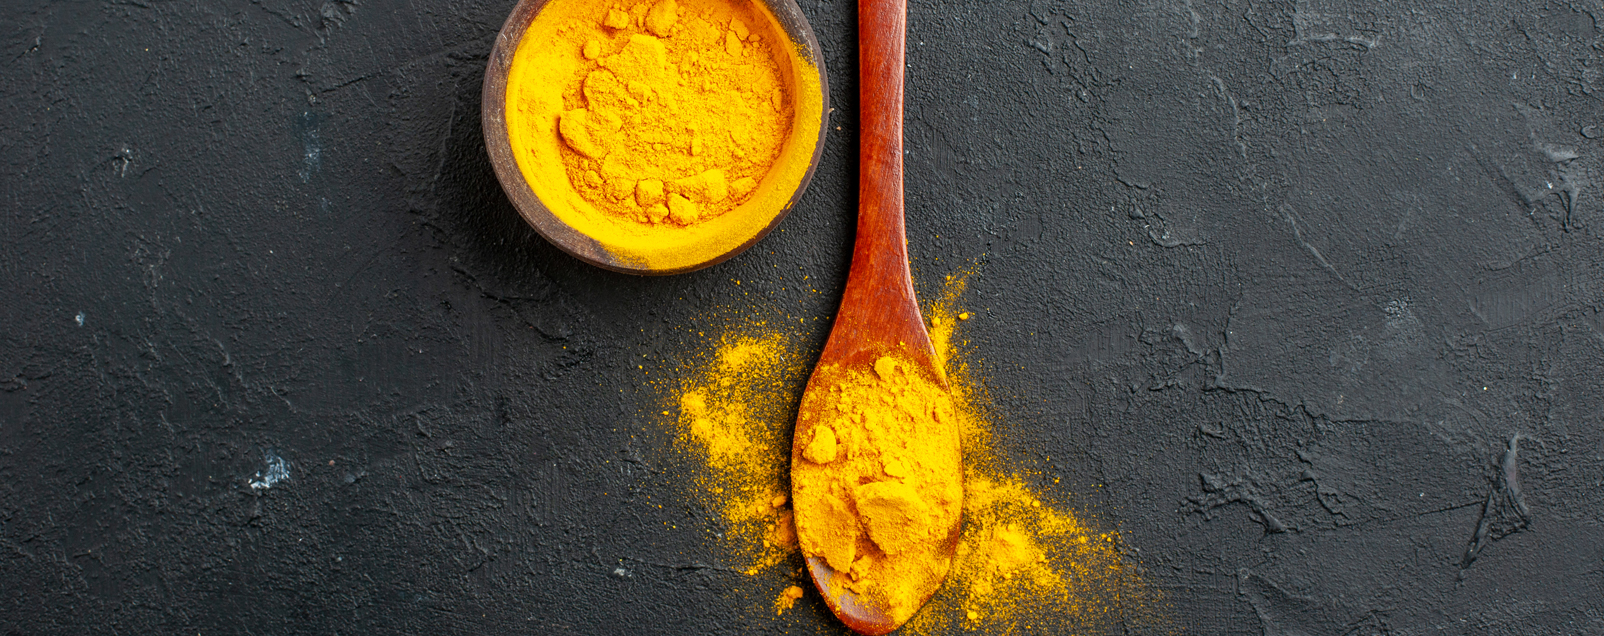 A Review of Curcumin's Effects on Human Health